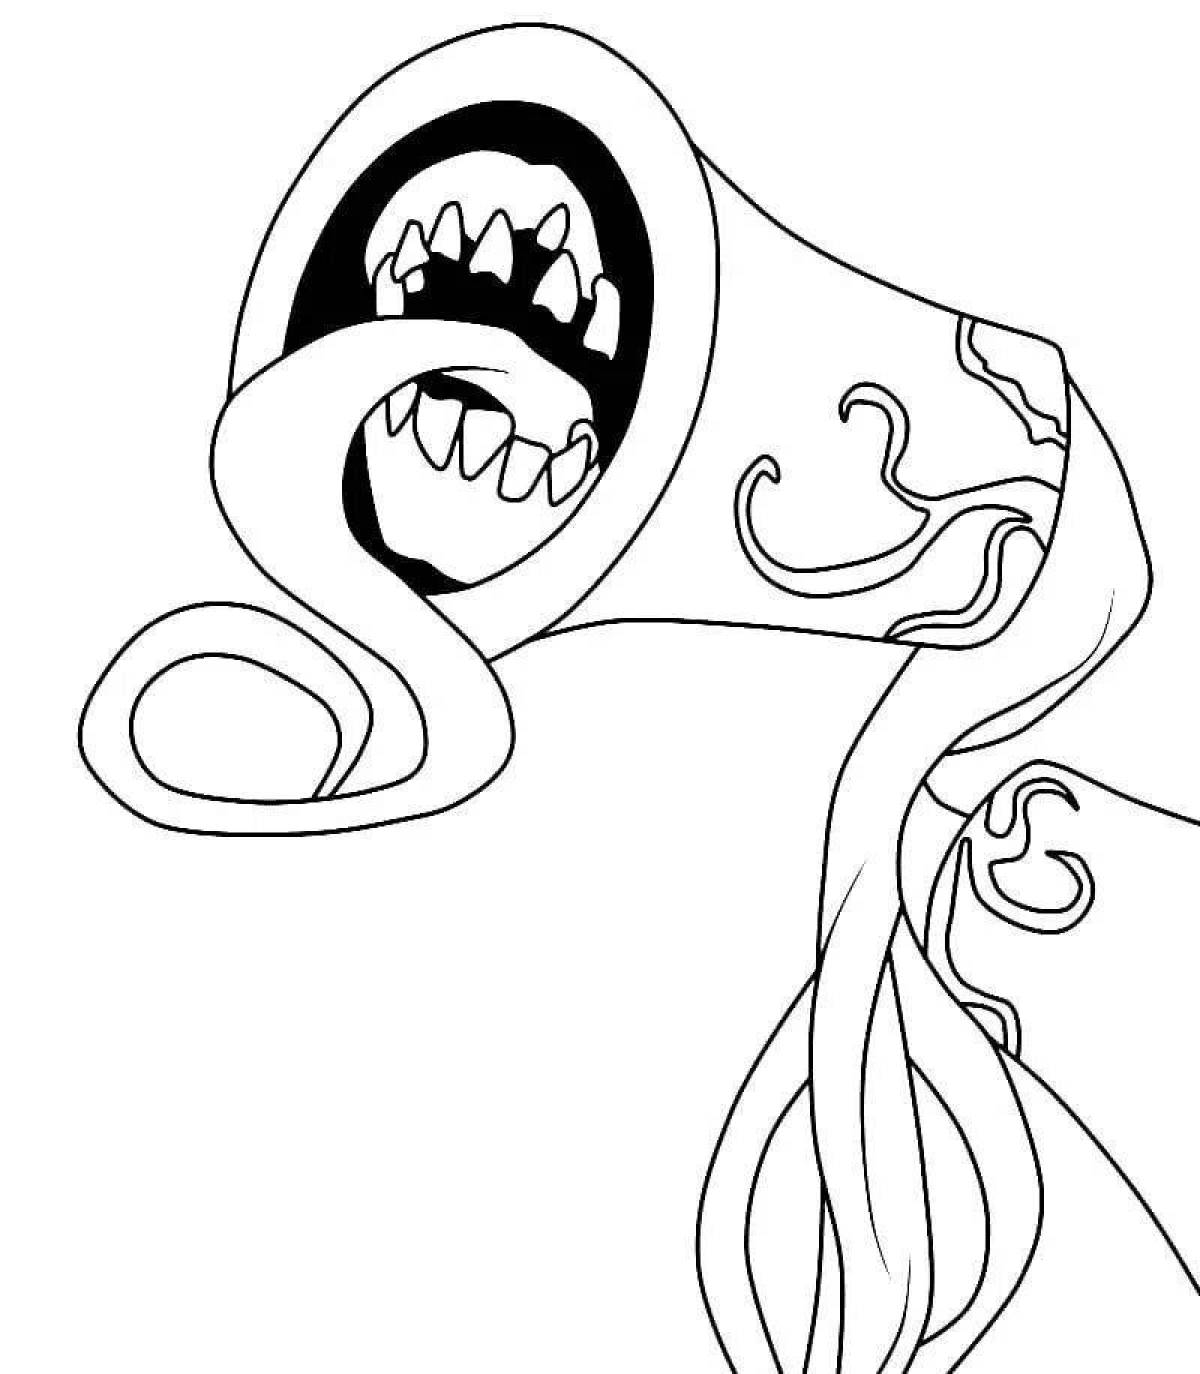 Coloring page unrecognizable monster with siren's head